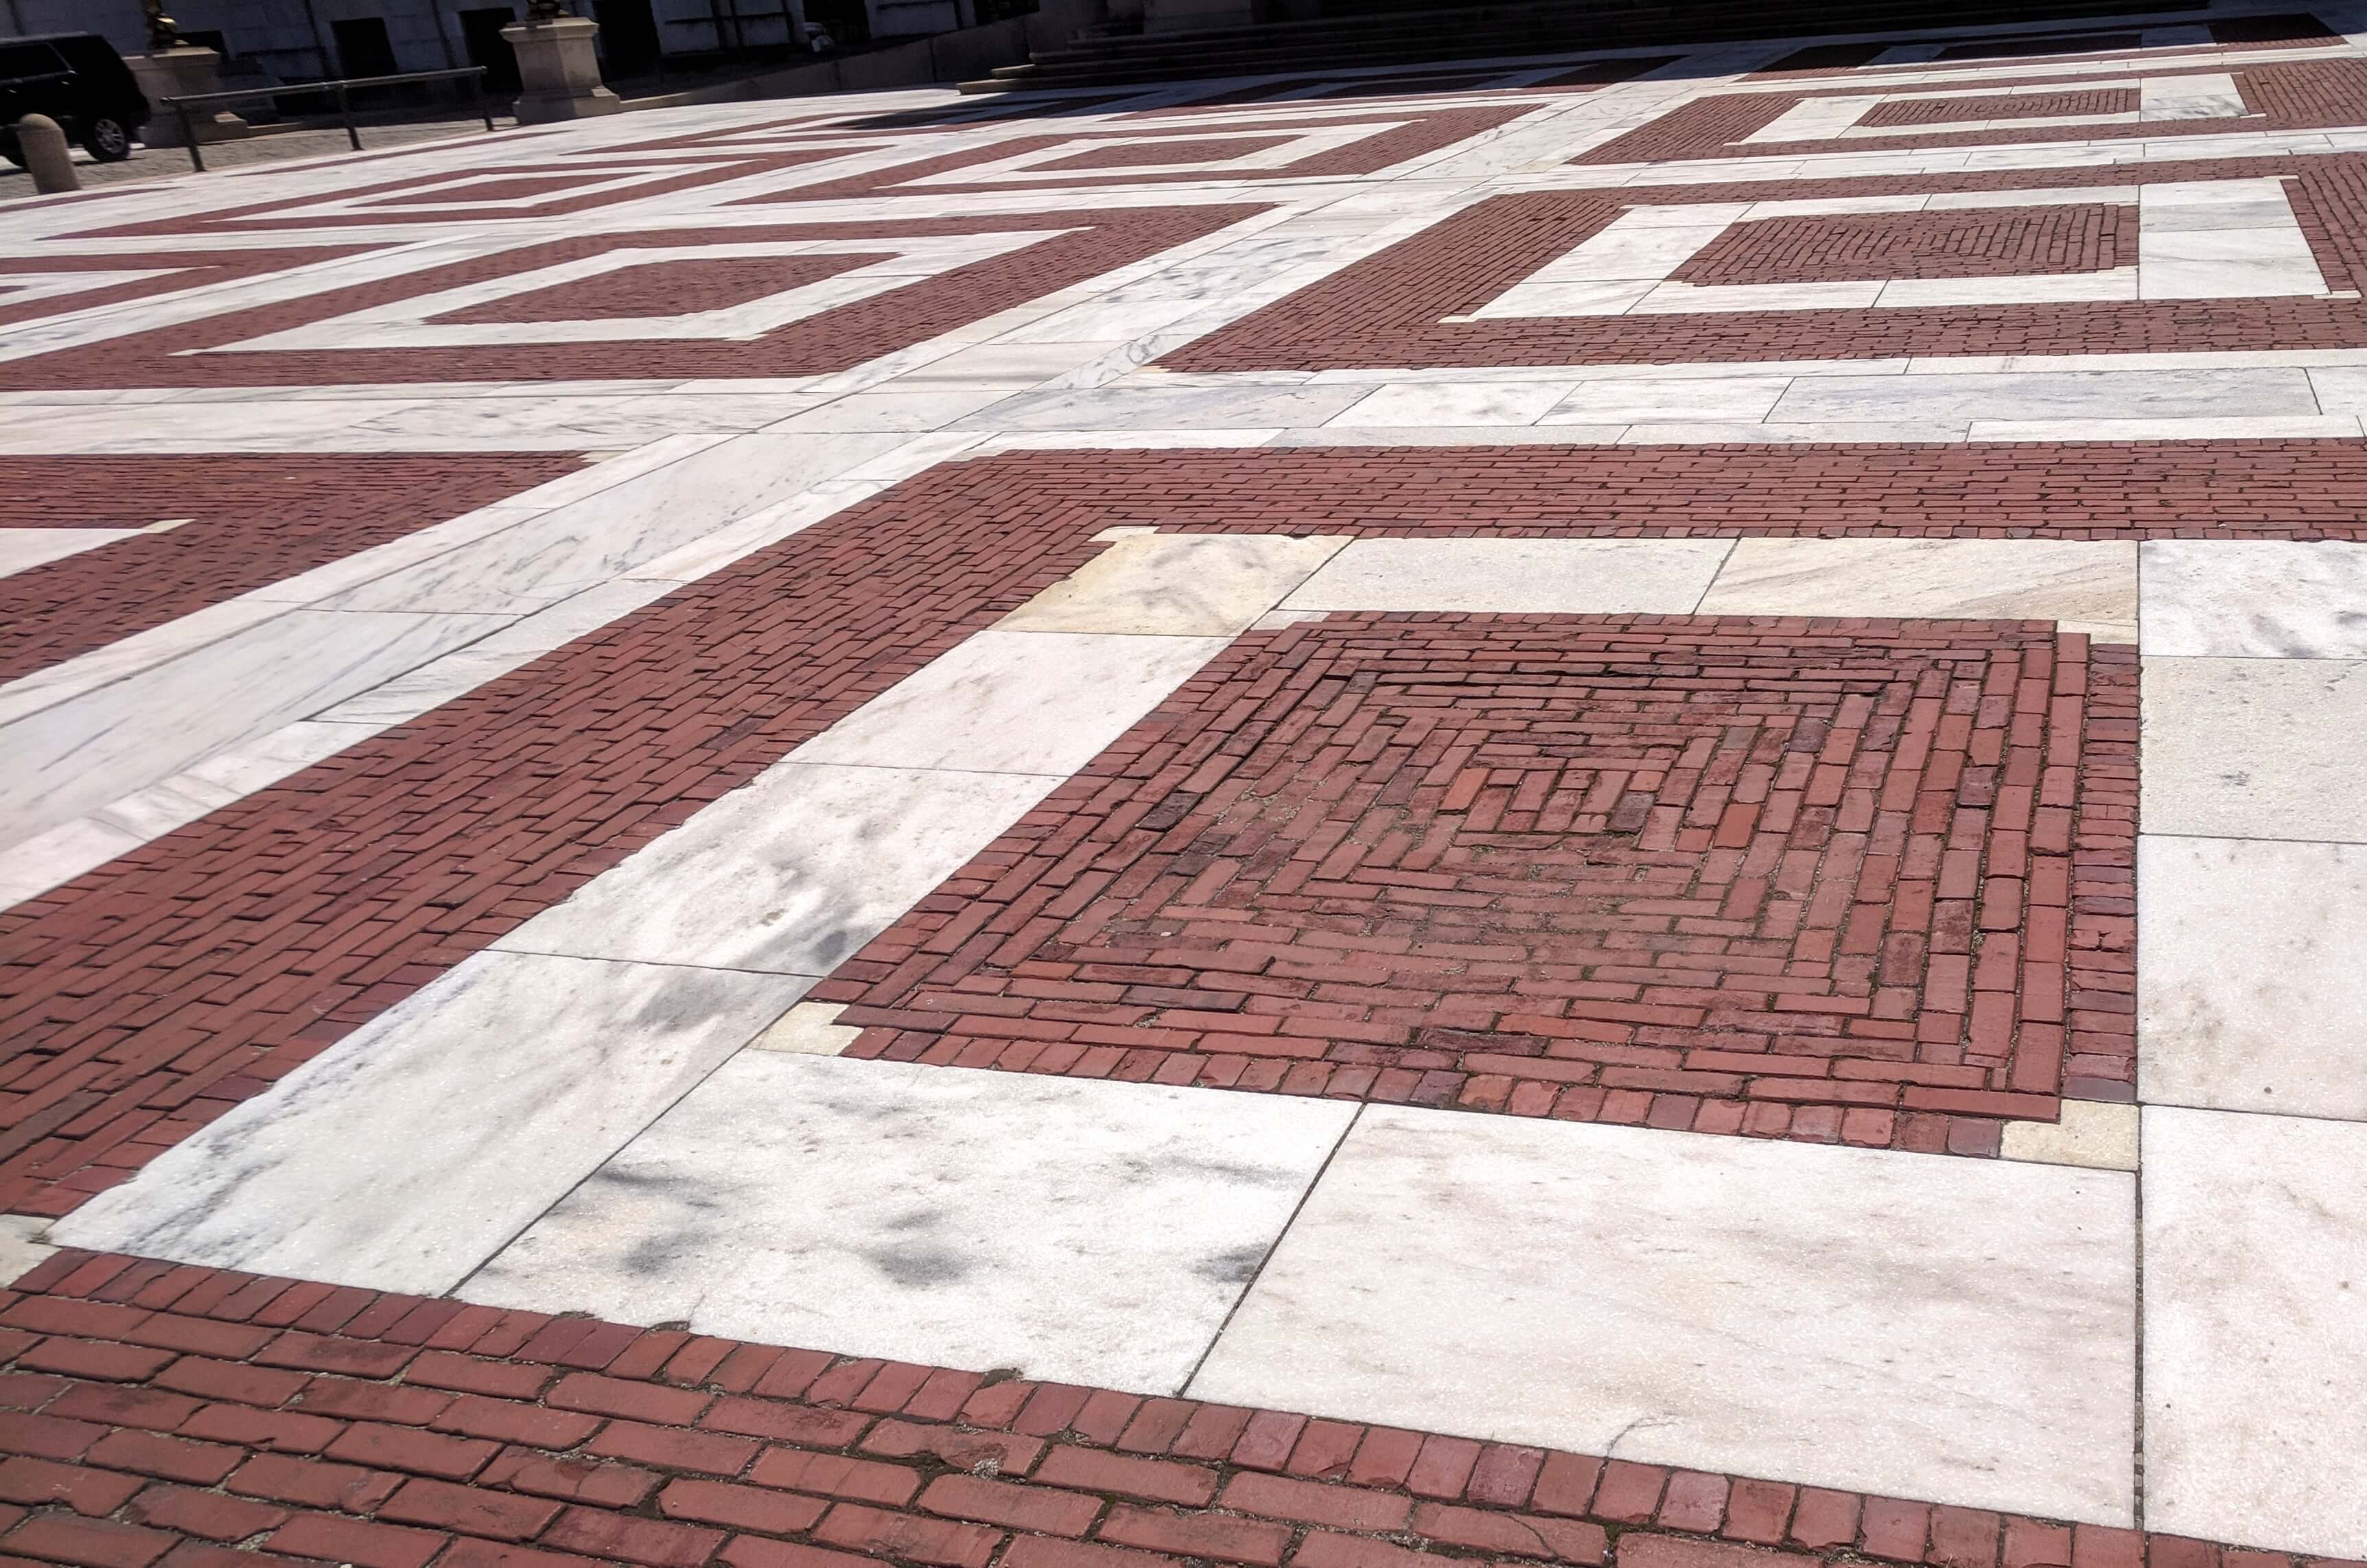 red brick and white marble designs on plaza